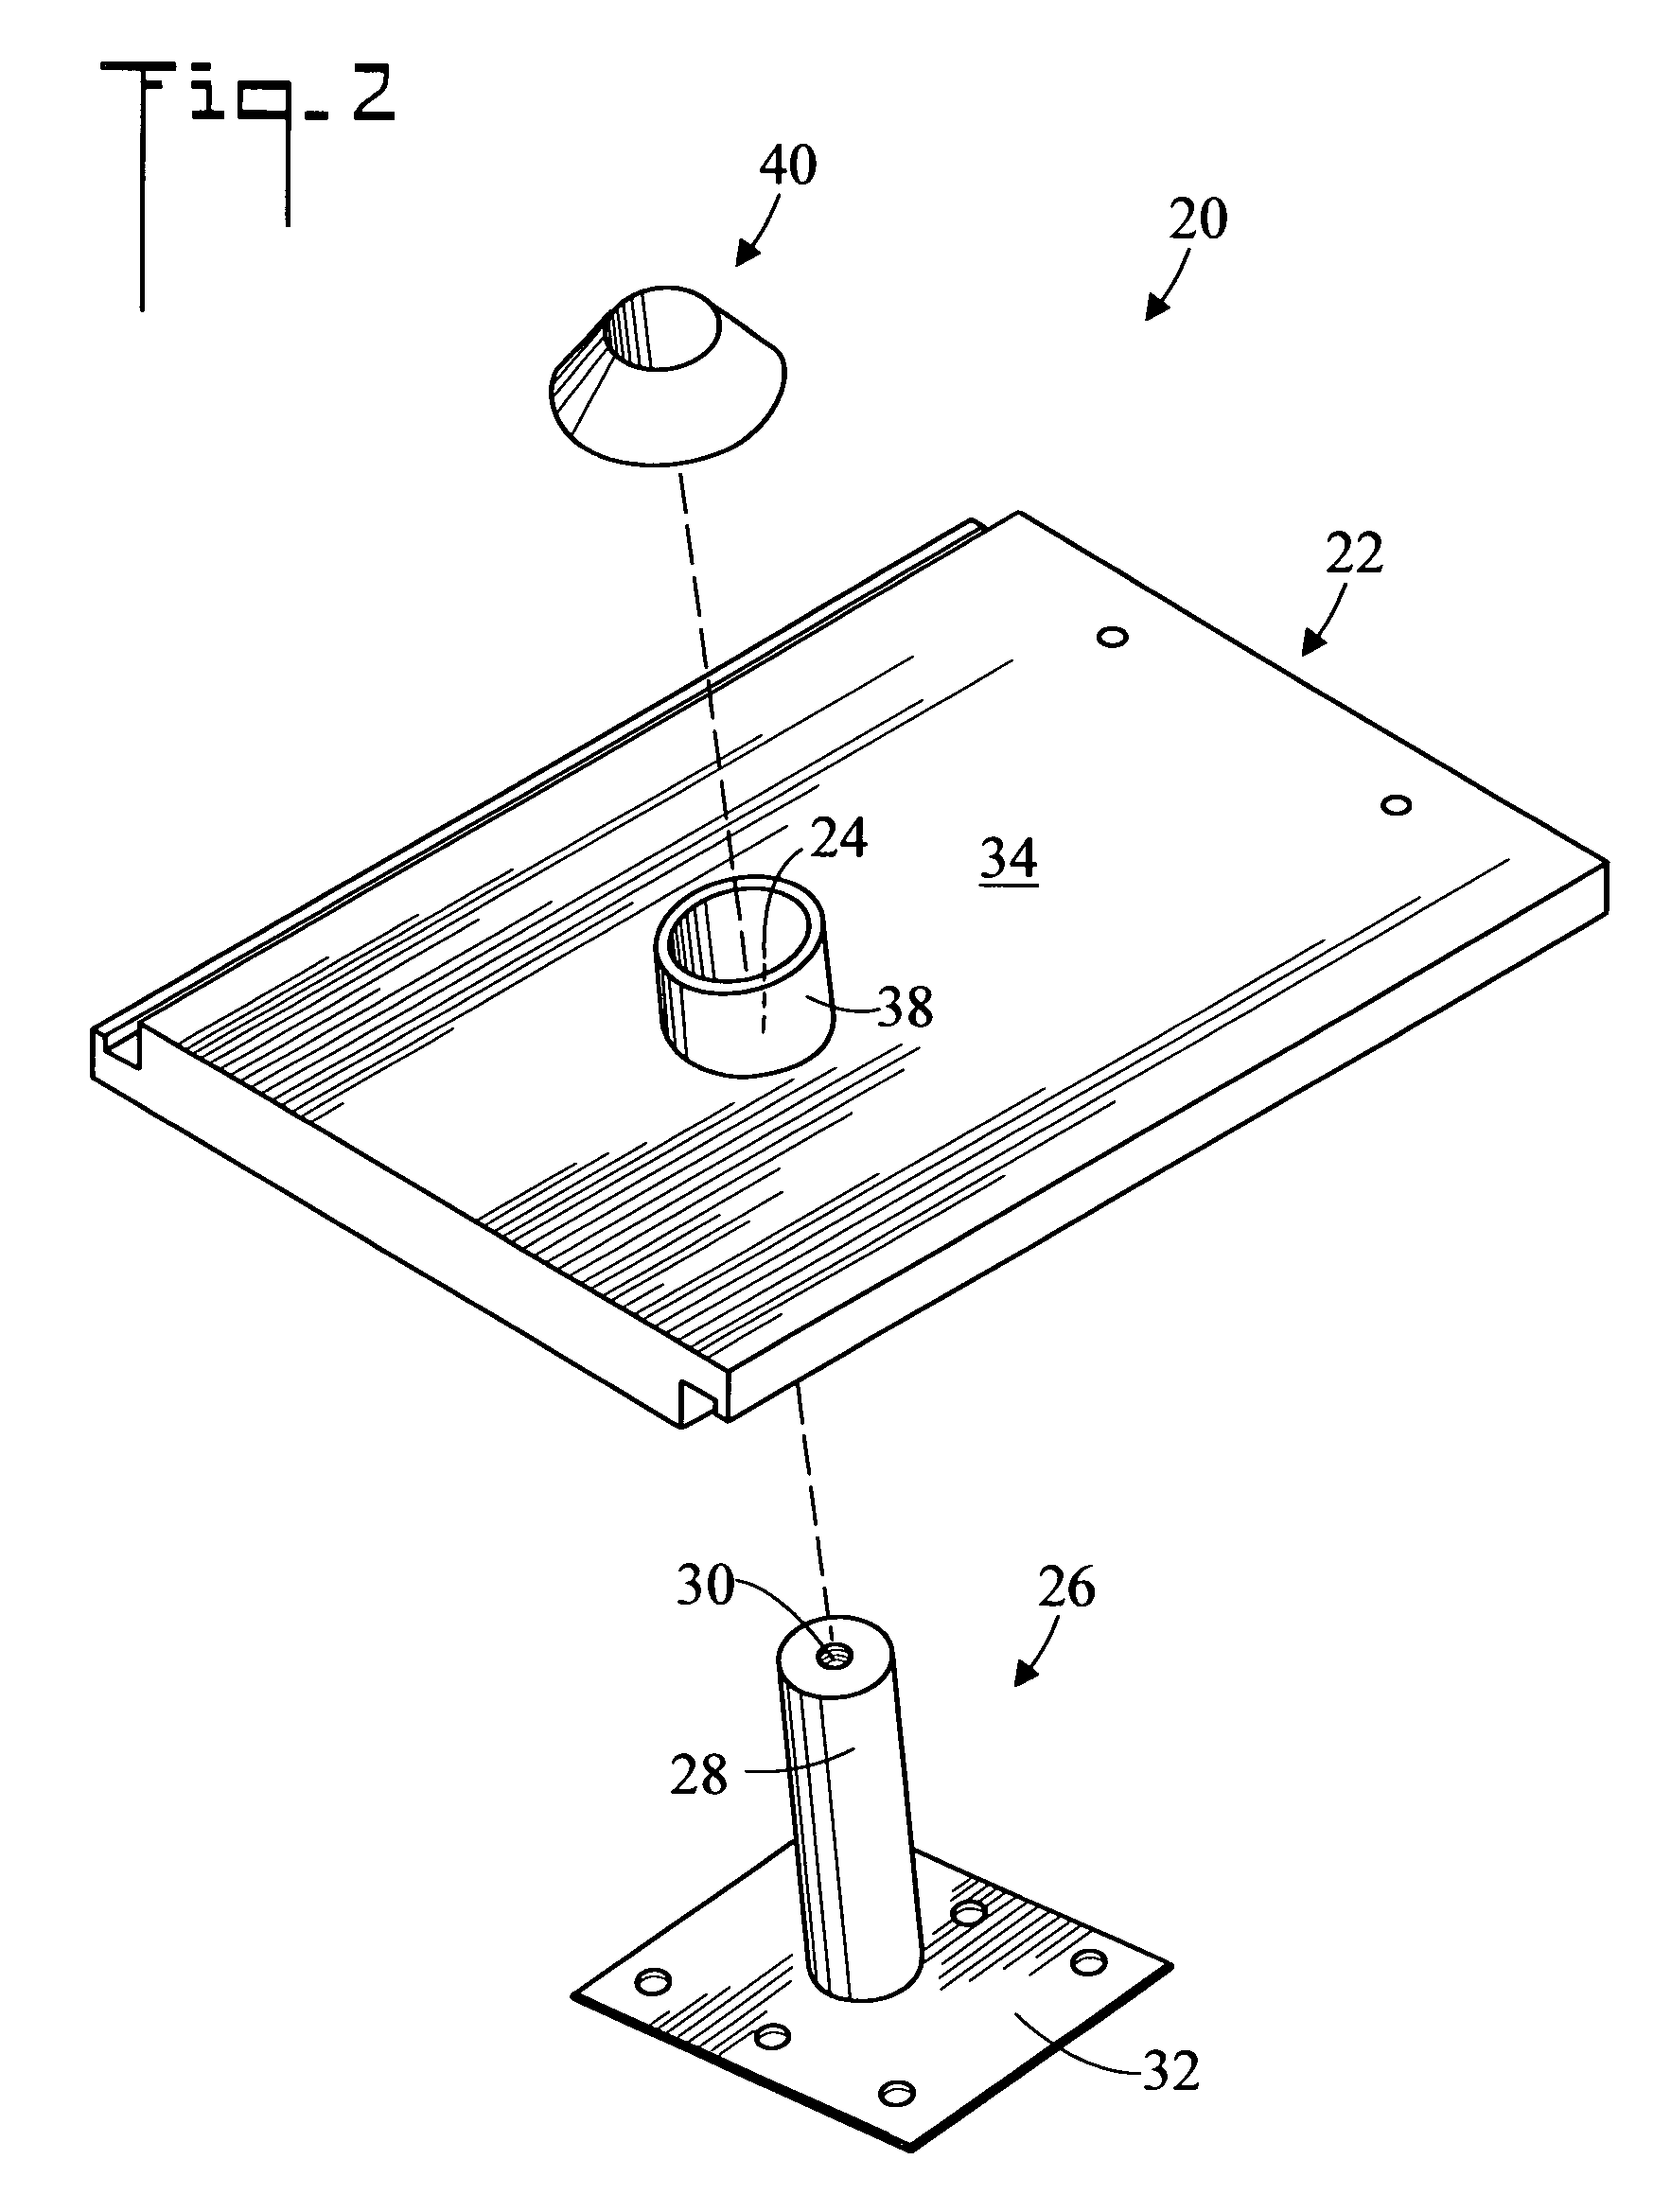 Method for installing a stanchion on a tile roof and system therefor